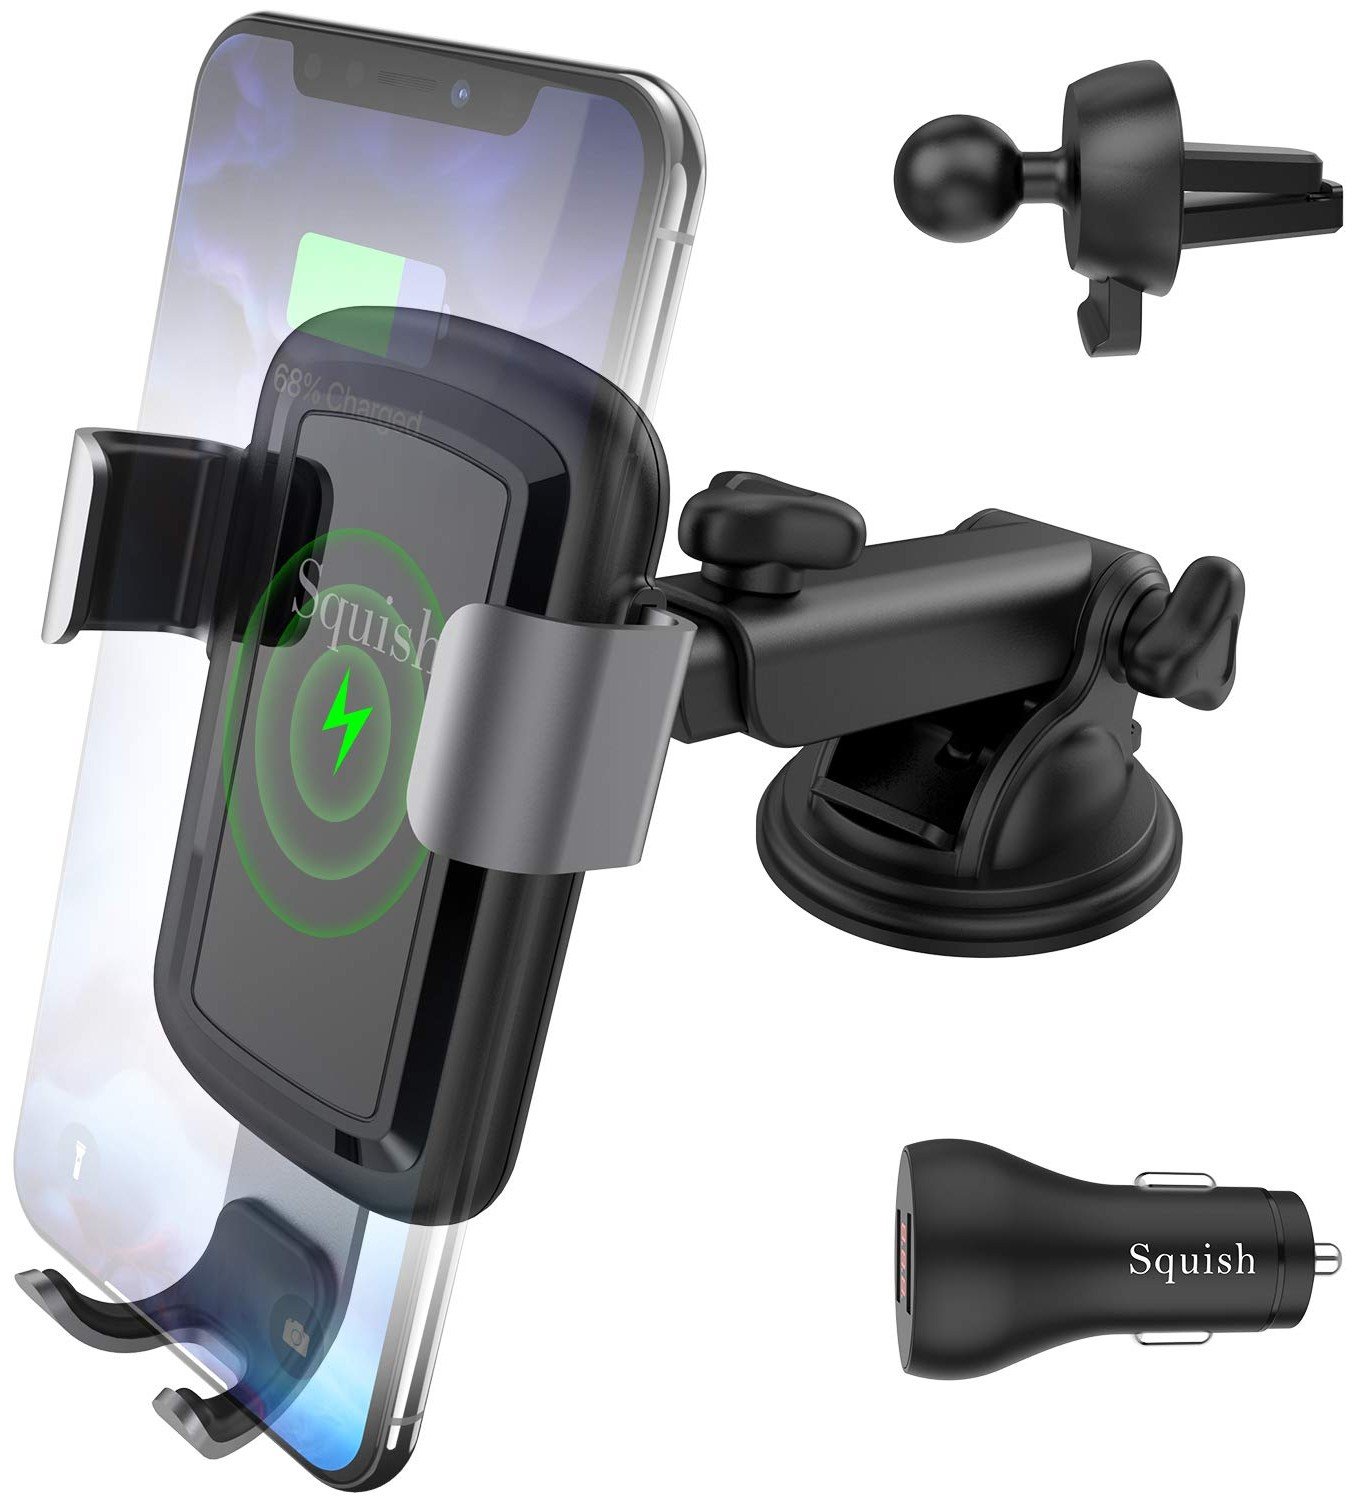 Squish Wireless Car Charger with QC 3.0 Car Charger